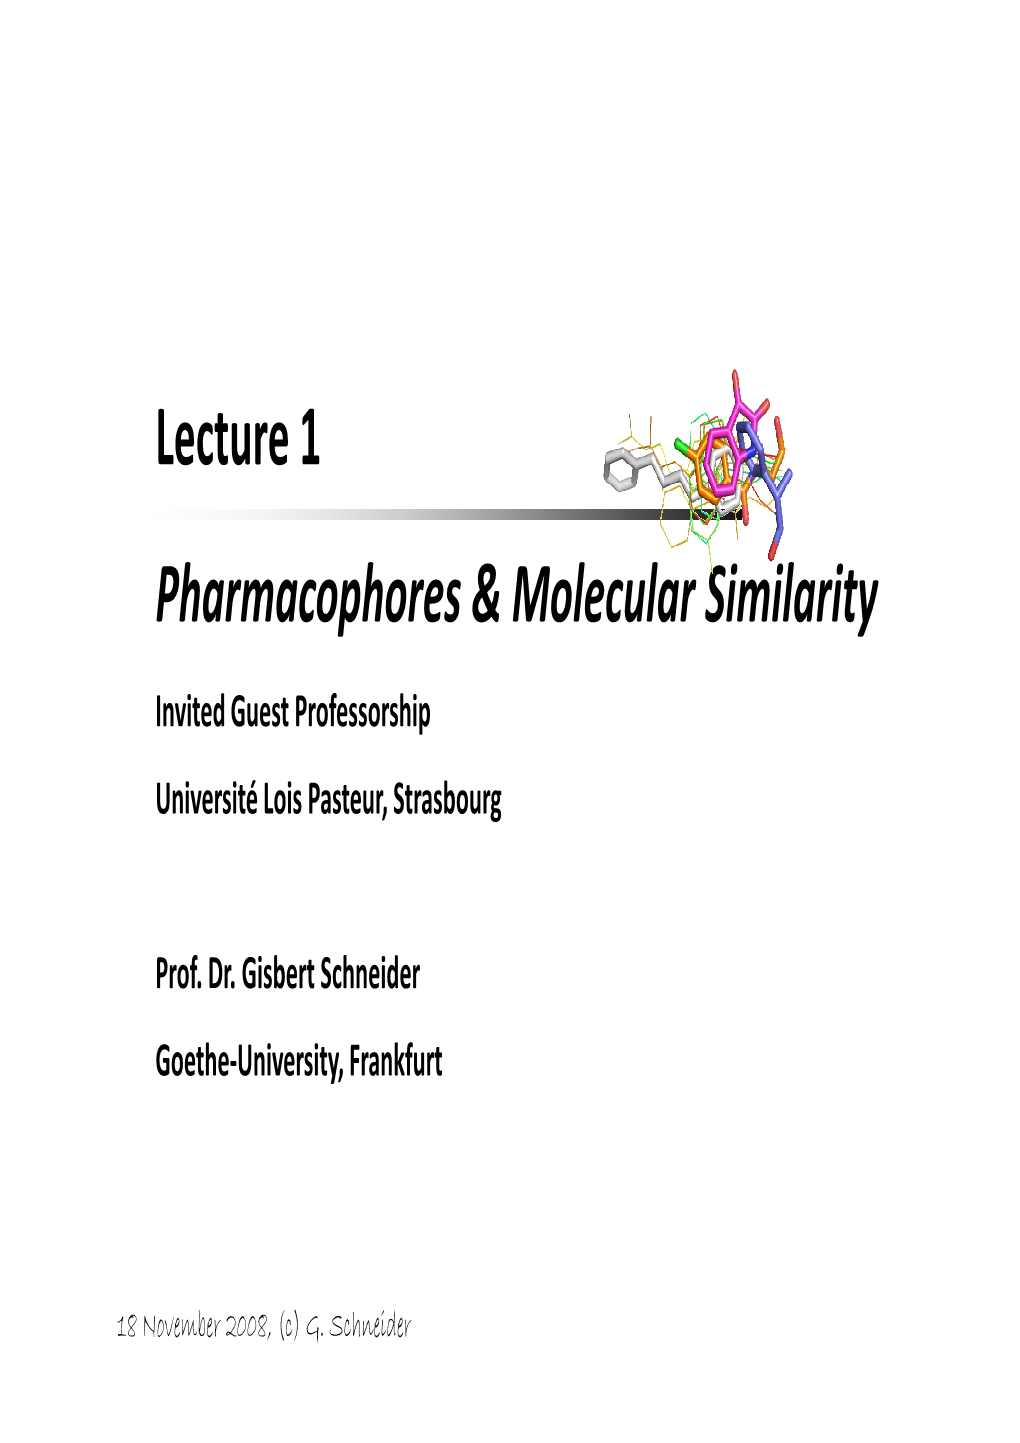 Lecture on Pharmacophores